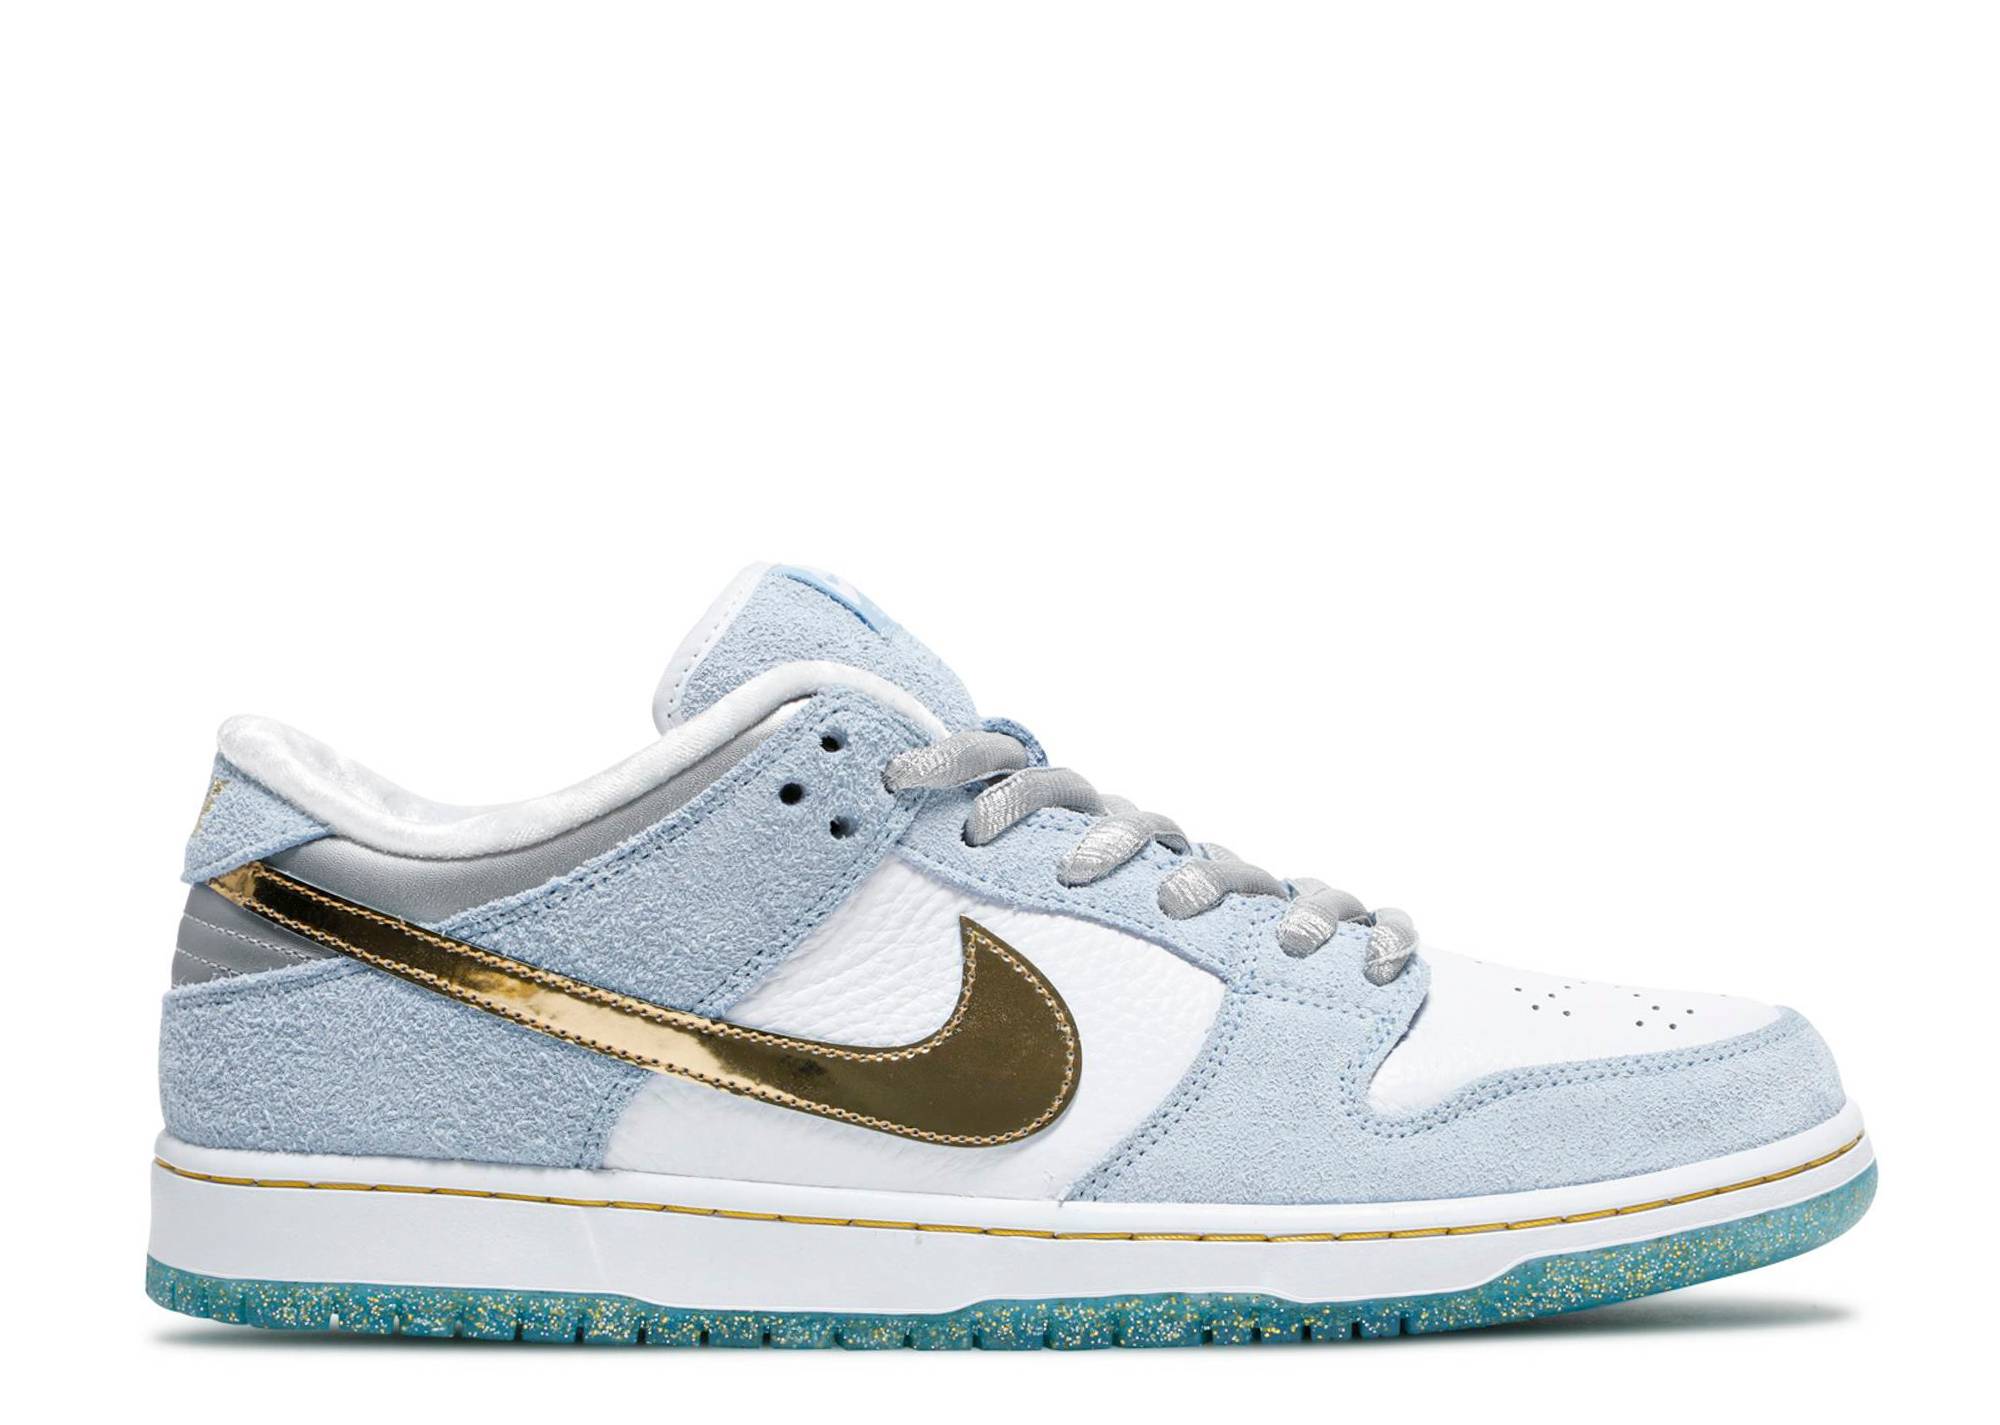 Sean Cliver x Dunk Low SB 'Holiday Special'